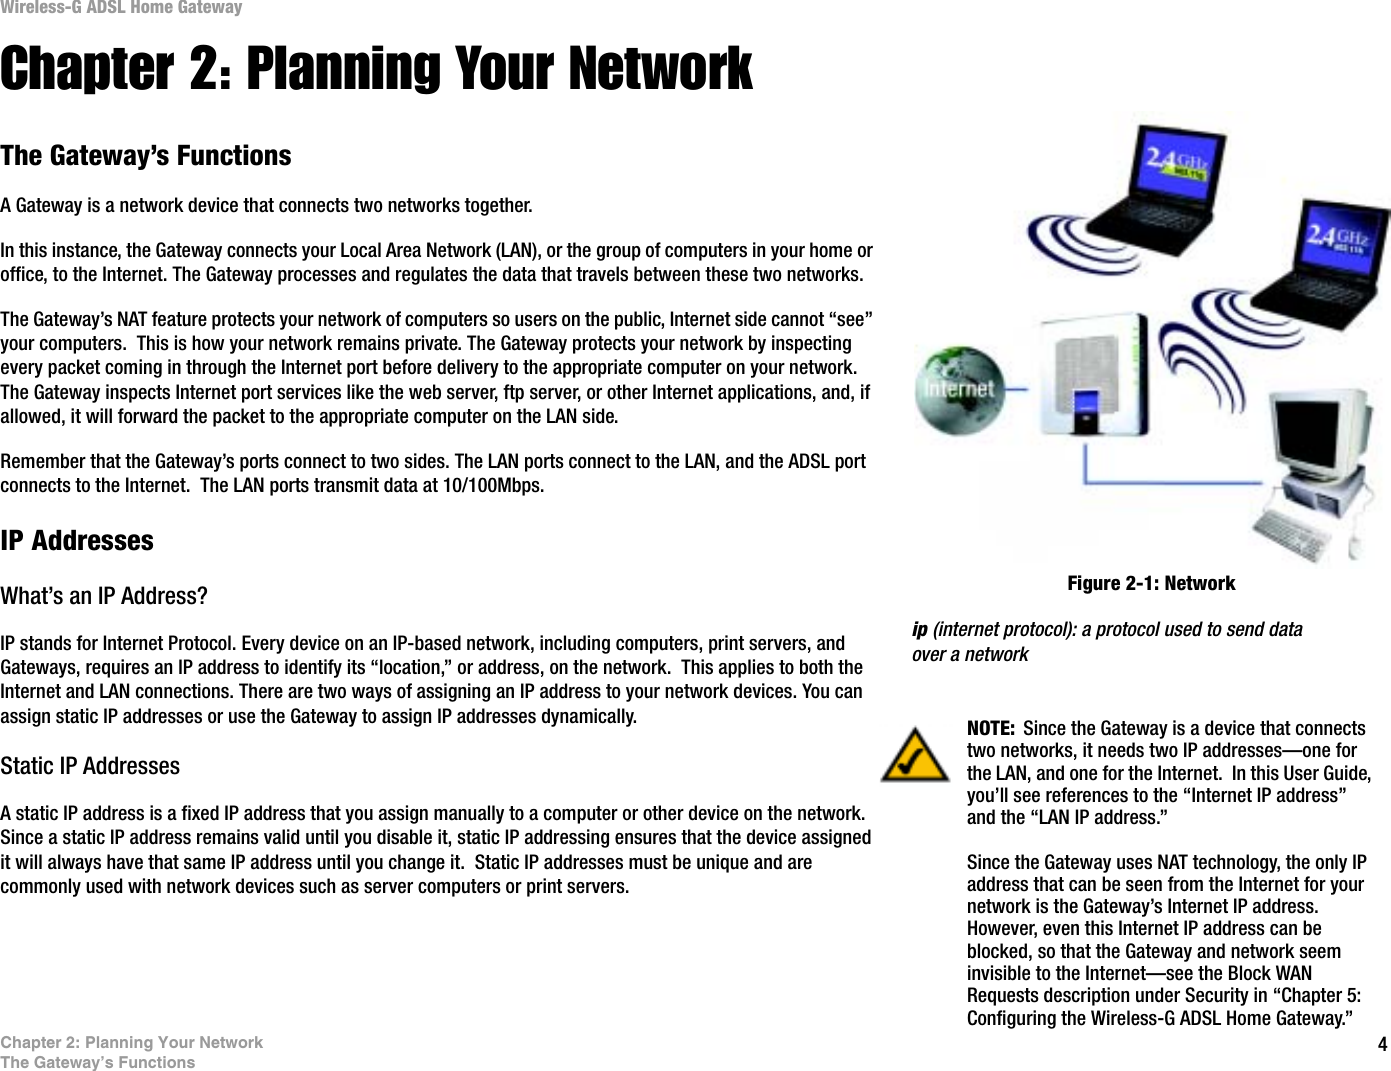 4Chapter 2: Planning Your NetworkThe Gateway’s FunctionsWireless-G ADSL Home GatewayChapter 2: Planning Your NetworkThe Gateway’s FunctionsA Gateway is a network device that connects two networks together. In this instance, the Gateway connects your Local Area Network (LAN), or the group of computers in your home or office, to the Internet. The Gateway processes and regulates the data that travels between these two networks.The Gateway’s NAT feature protects your network of computers so users on the public, Internet side cannot “see” your computers.  This is how your network remains private. The Gateway protects your network by inspecting every packet coming in through the Internet port before delivery to the appropriate computer on your network. The Gateway inspects Internet port services like the web server, ftp server, or other Internet applications, and, if allowed, it will forward the packet to the appropriate computer on the LAN side.Remember that the Gateway’s ports connect to two sides. The LAN ports connect to the LAN, and the ADSL port connects to the Internet.  The LAN ports transmit data at 10/100Mbps.IP AddressesWhat’s an IP Address?IP stands for Internet Protocol. Every device on an IP-based network, including computers, print servers, and Gateways, requires an IP address to identify its “location,” or address, on the network.  This applies to both the Internet and LAN connections. There are two ways of assigning an IP address to your network devices. You can assign static IP addresses or use the Gateway to assign IP addresses dynamically.Static IP Addresses  A static IP address is a fixed IP address that you assign manually to a computer or other device on the network.  Since a static IP address remains valid until you disable it, static IP addressing ensures that the device assigned it will always have that same IP address until you change it.  Static IP addresses must be unique and are commonly used with network devices such as server computers or print servers.NOTE: Since the Gateway is a device that connects two networks, it needs two IP addresses—one for the LAN, and one for the Internet.  In this User Guide, you’ll see references to the “Internet IP address” and the “LAN IP address.”Since the Gateway uses NAT technology, the only IP address that can be seen from the Internet for your network is the Gateway’s Internet IP address. However, even this Internet IP address can be blocked, so that the Gateway and network seem invisible to the Internet—see the Block WAN Requests description under Security in “Chapter 5: Configuring the Wireless-G ADSL Home Gateway.”Figure 2-1: Networkip (internet protocol): a protocol used to send data over a network